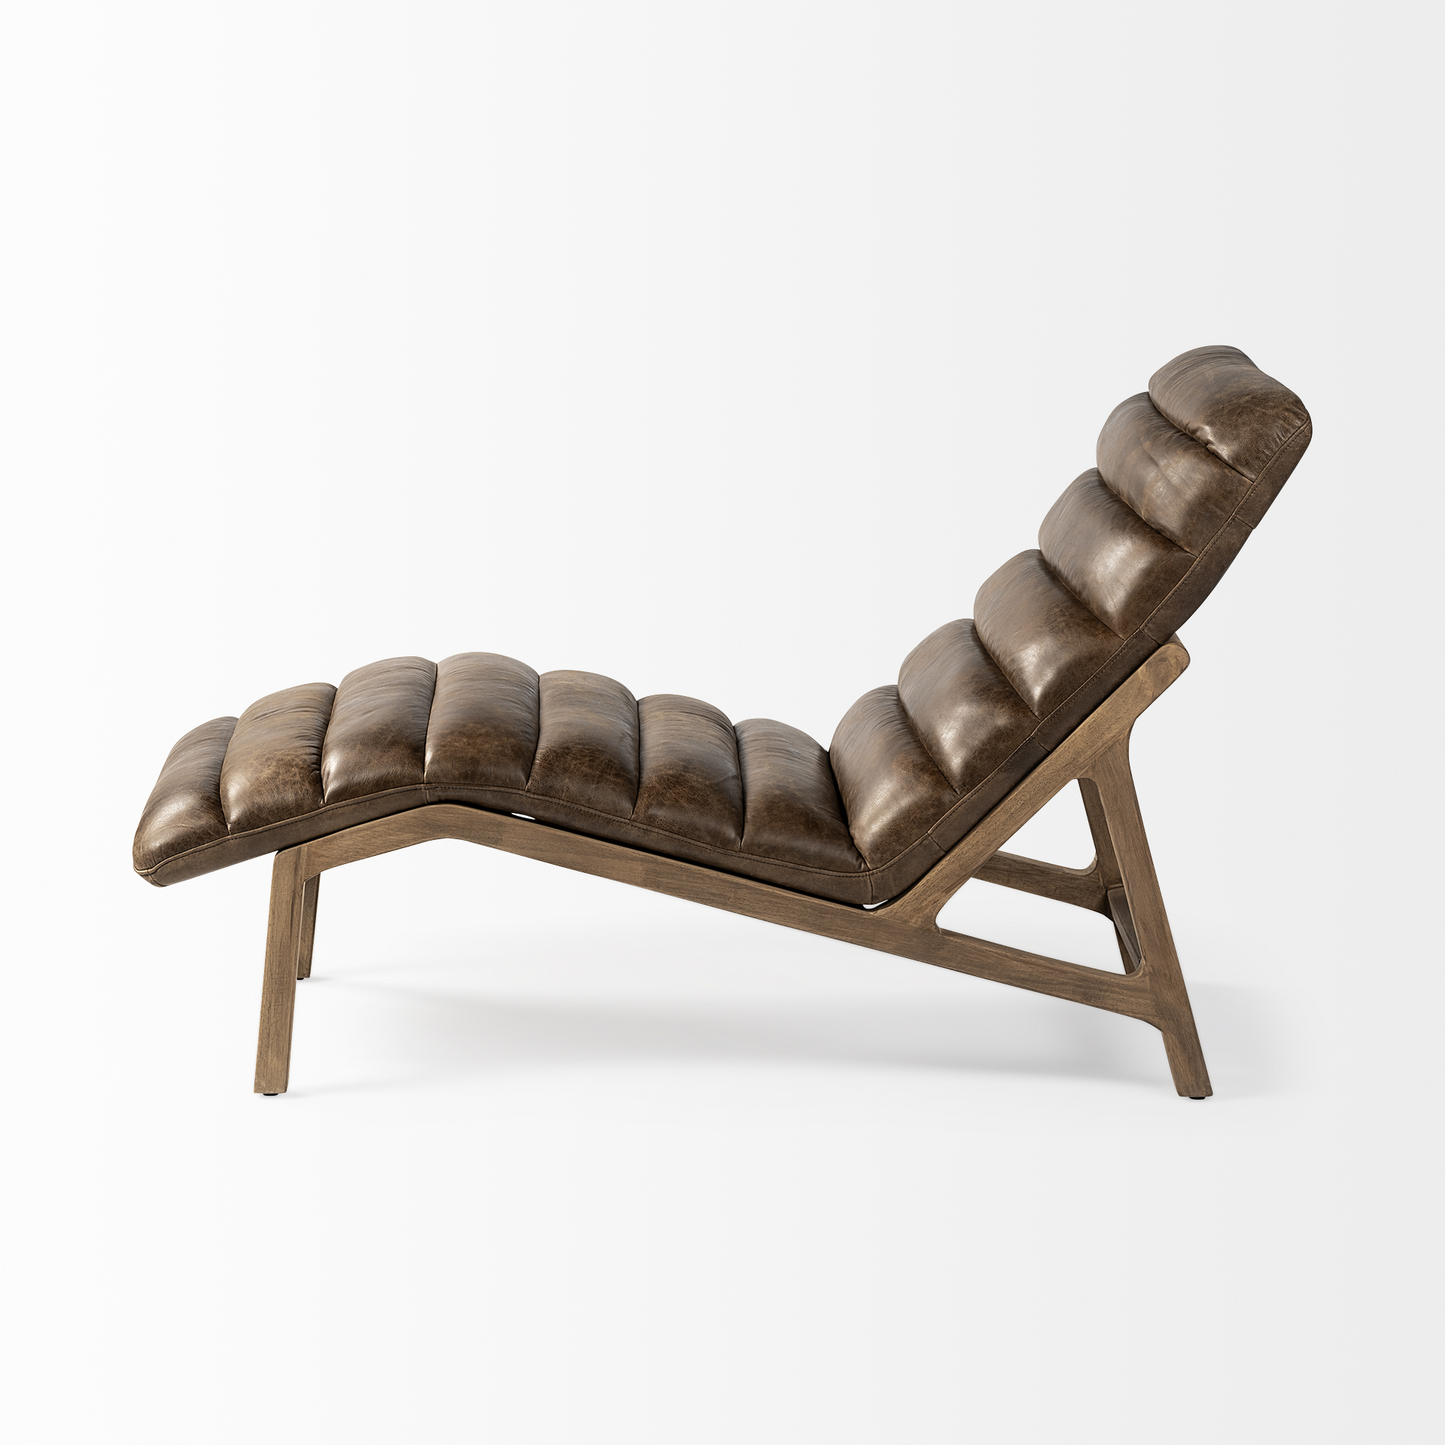 Genuine Leather Chaise Lounge Chair - Modern Brown